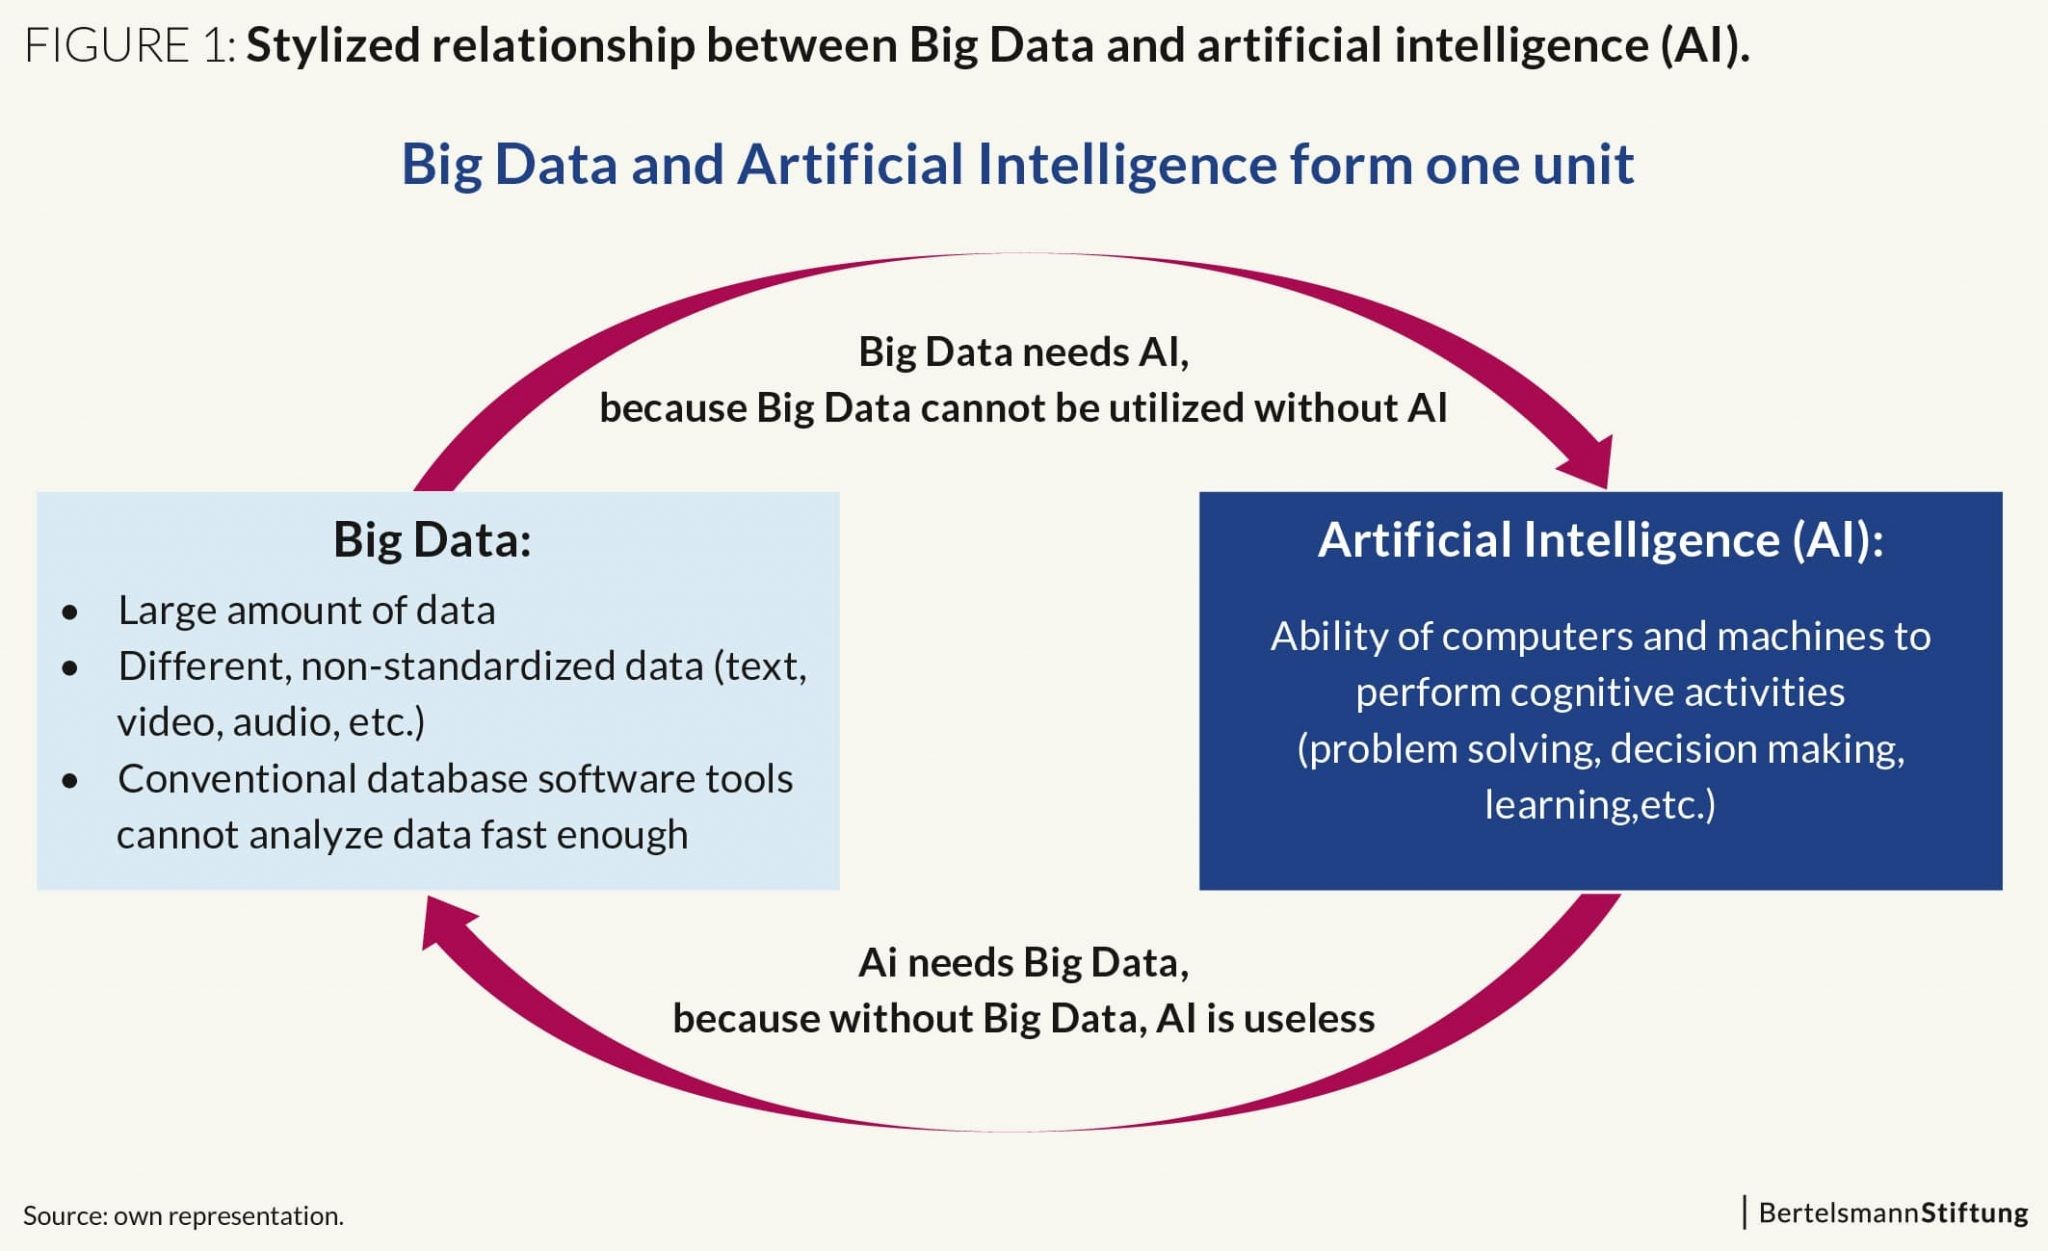 Big data and artificial intelligence complement each other and are useful for the financial industry